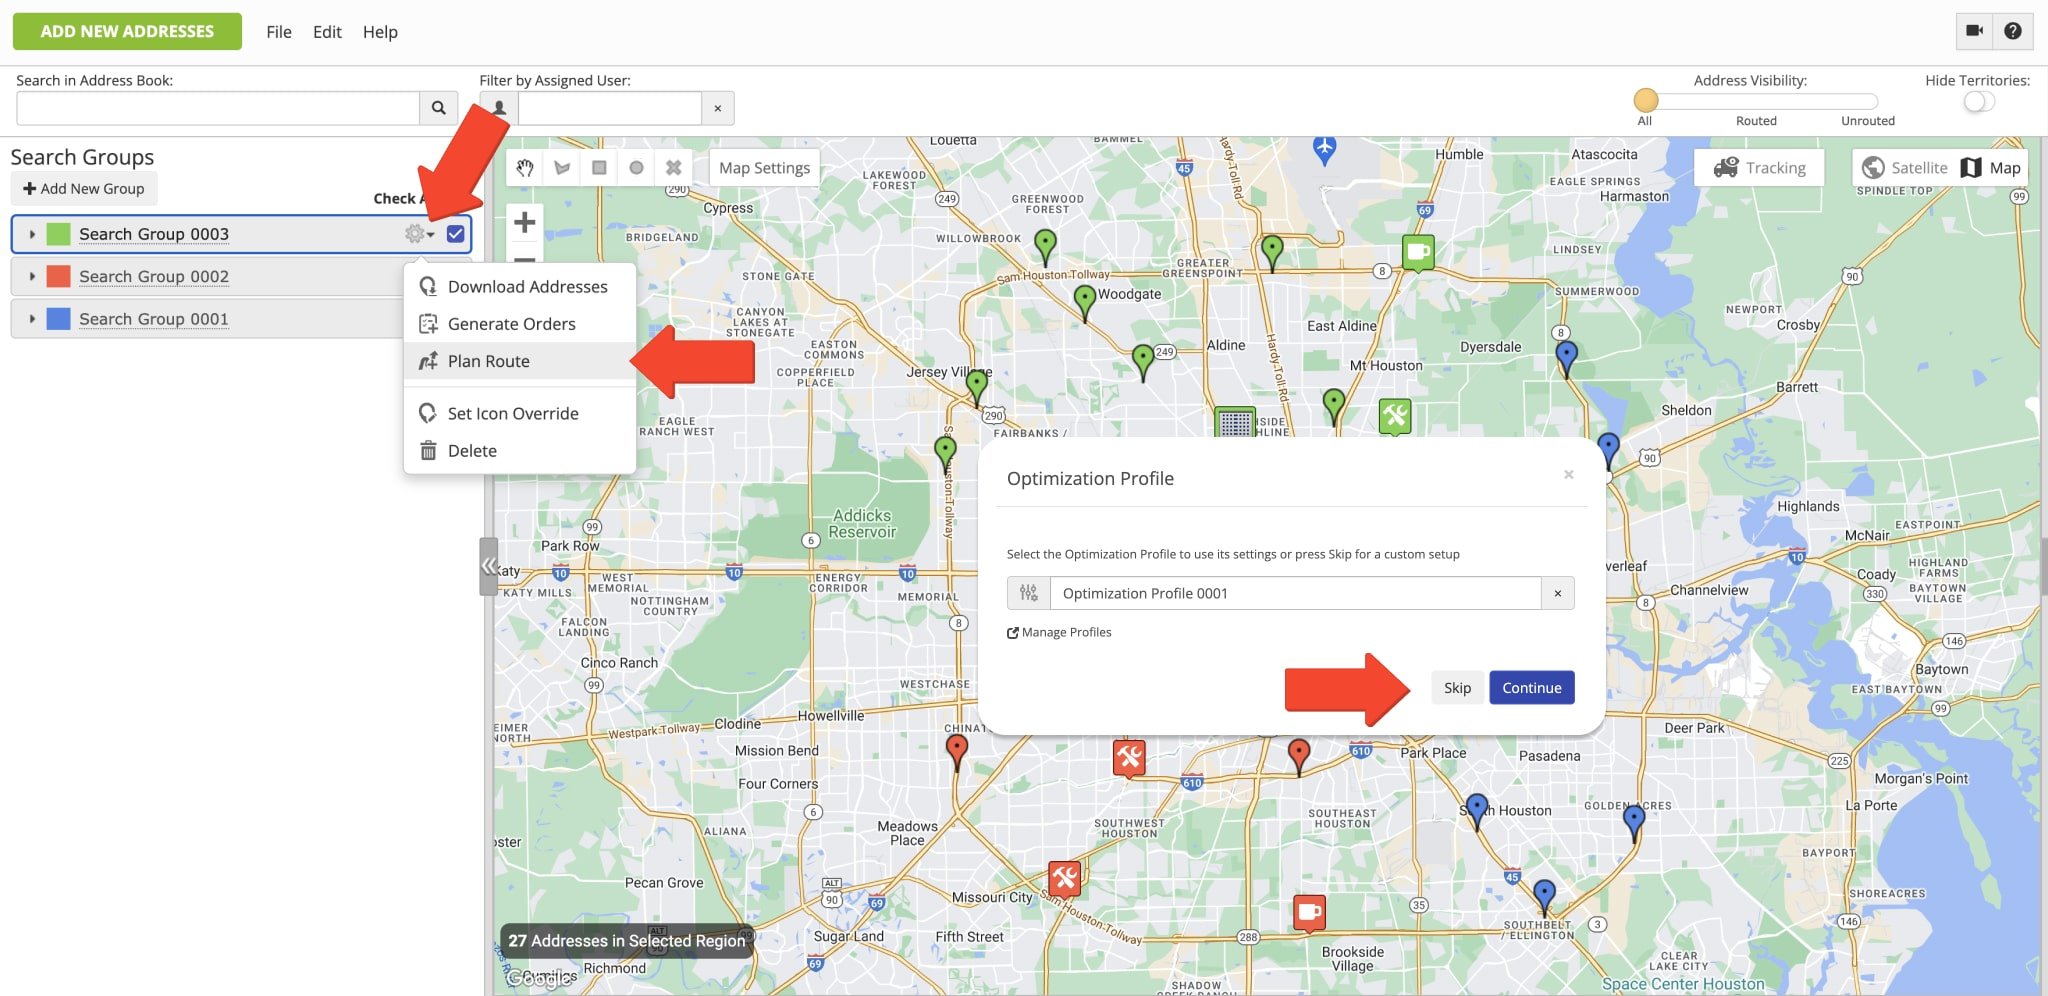 Plan last mile routes with customer addresses and locations filtered on the Address Book Map using Search Groups.